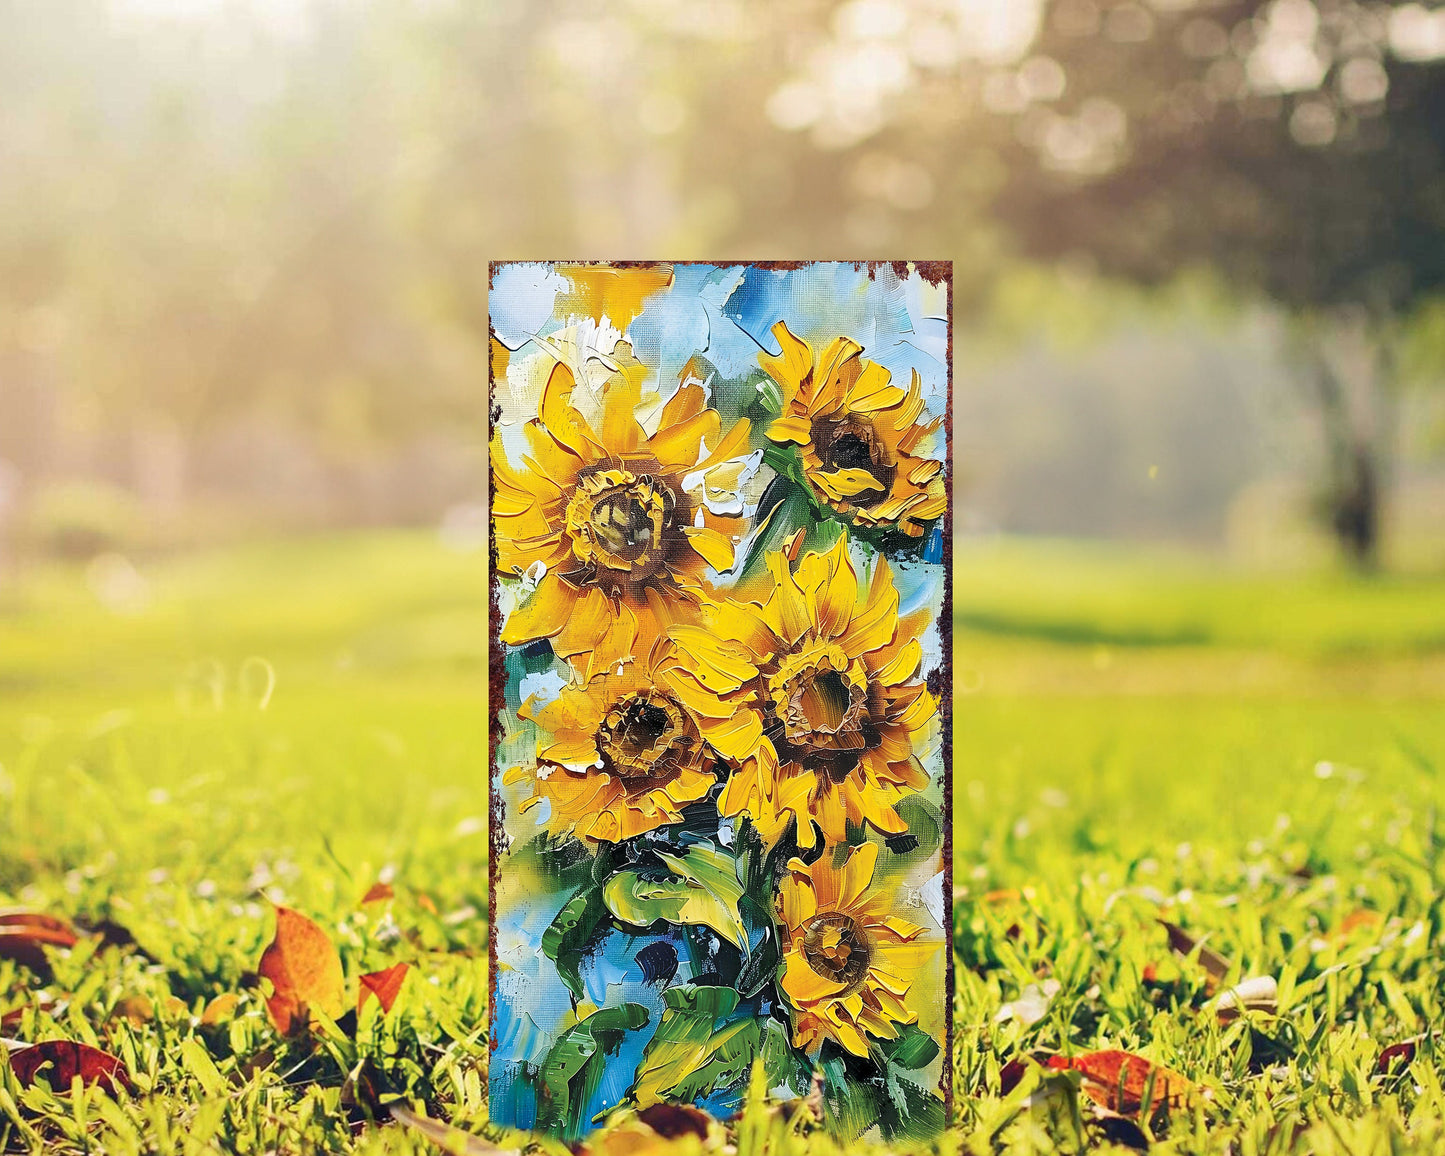 30in Summer Garden Stake - Oil Paint Style Sunflower Decor - Made in USA - Ideal for Outdoor, Yard, and Garden Decorations